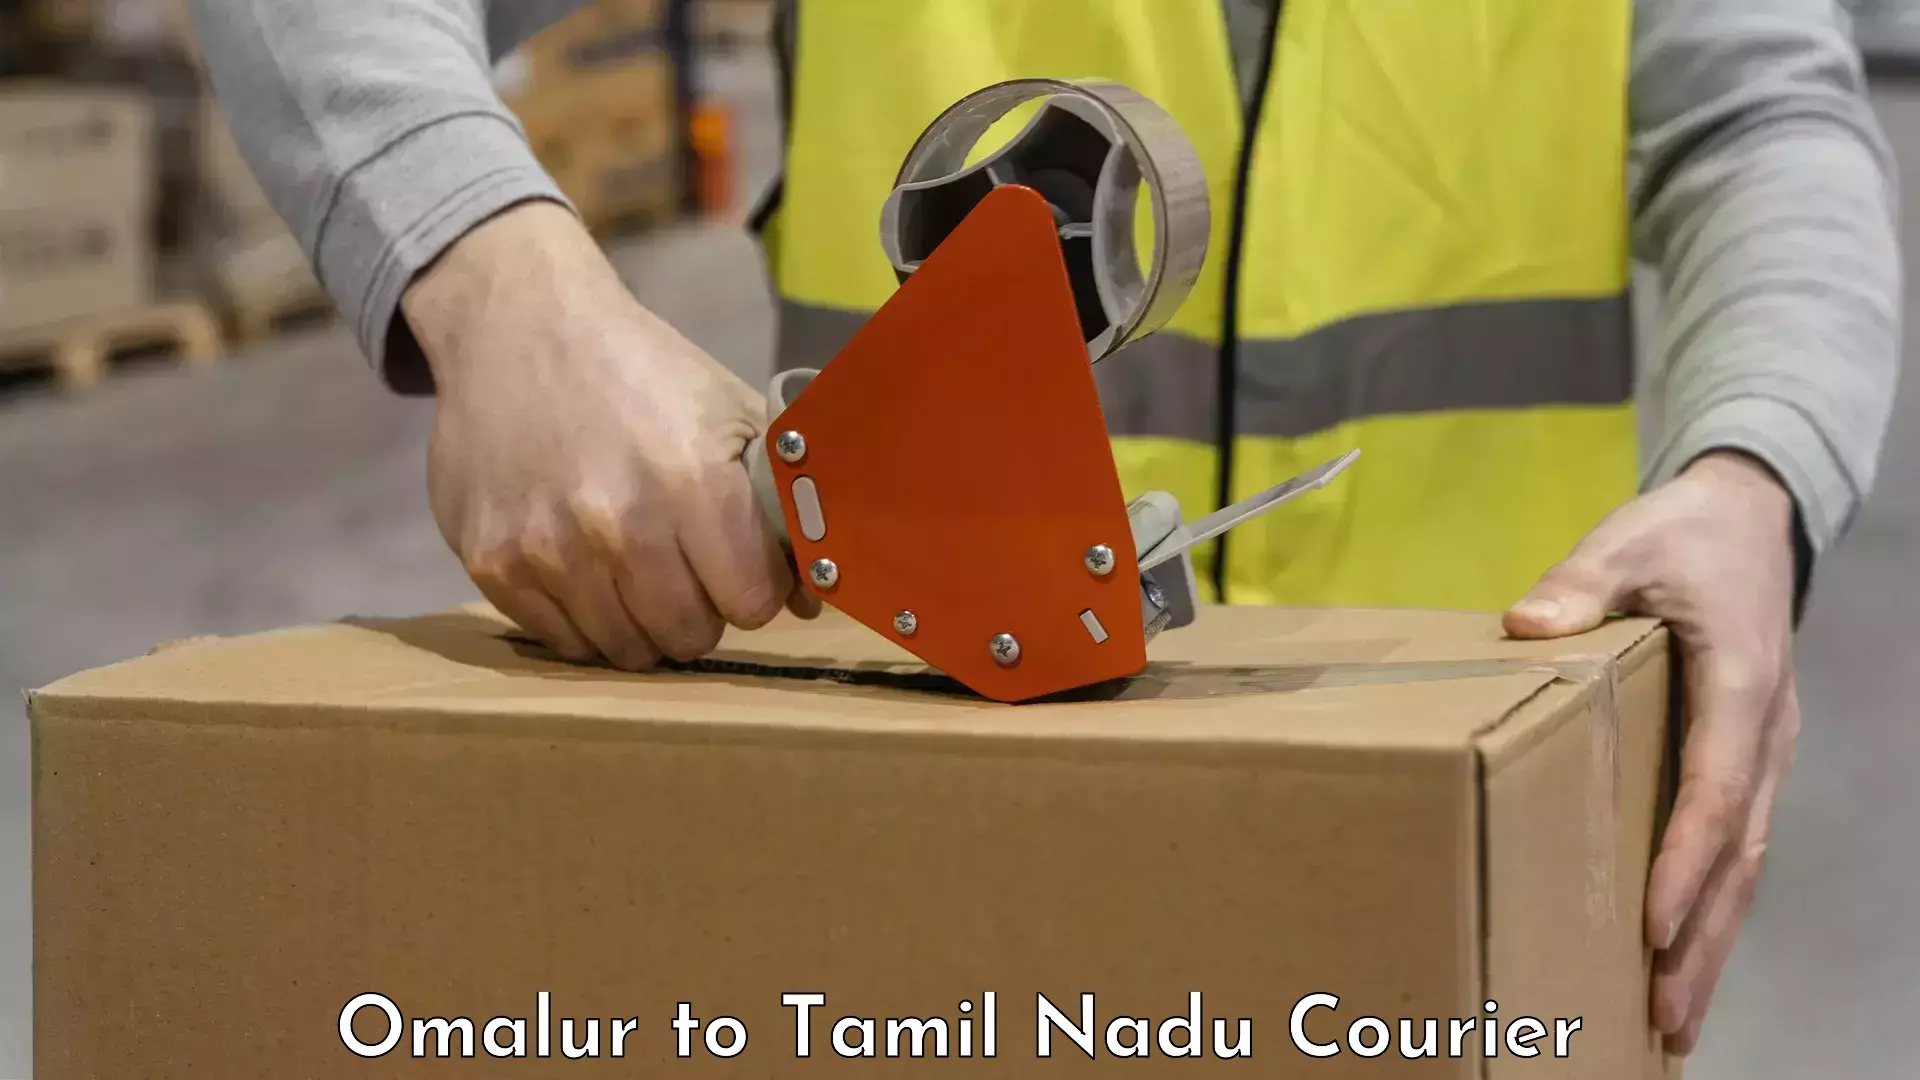 Online luggage shipping booking Omalur to Trichy